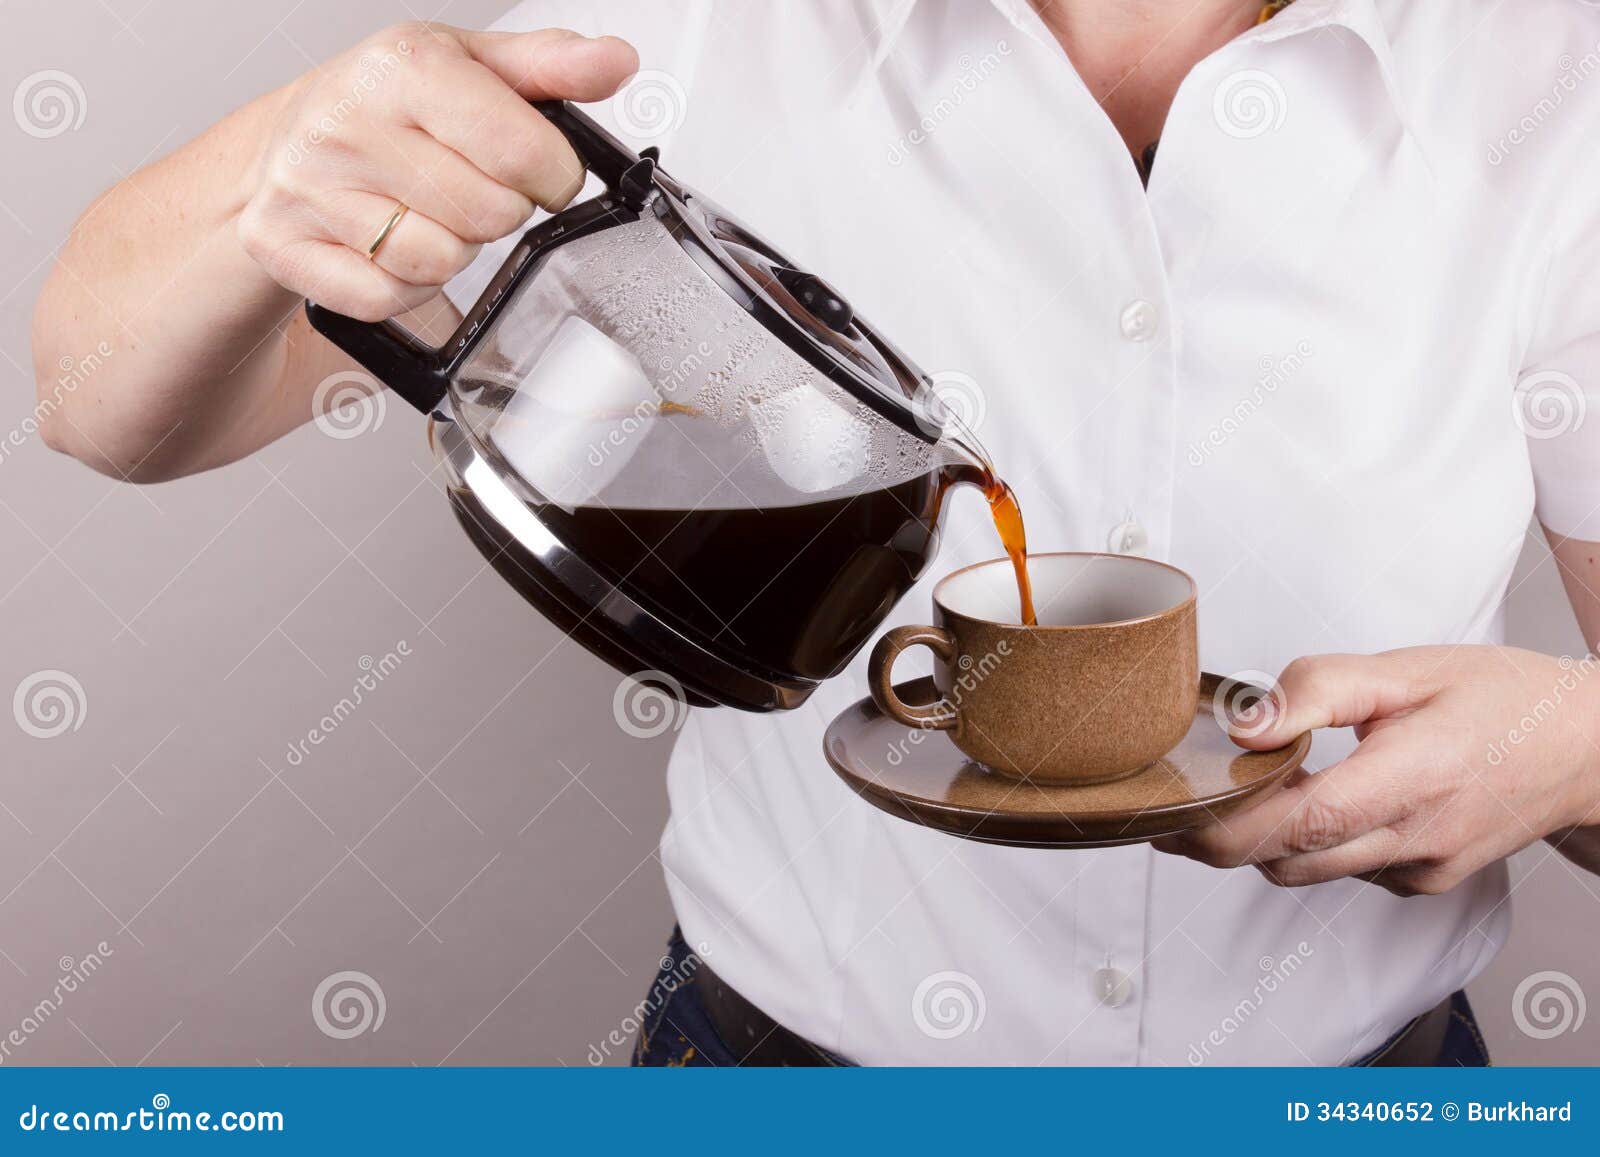 employing coffee in a cup